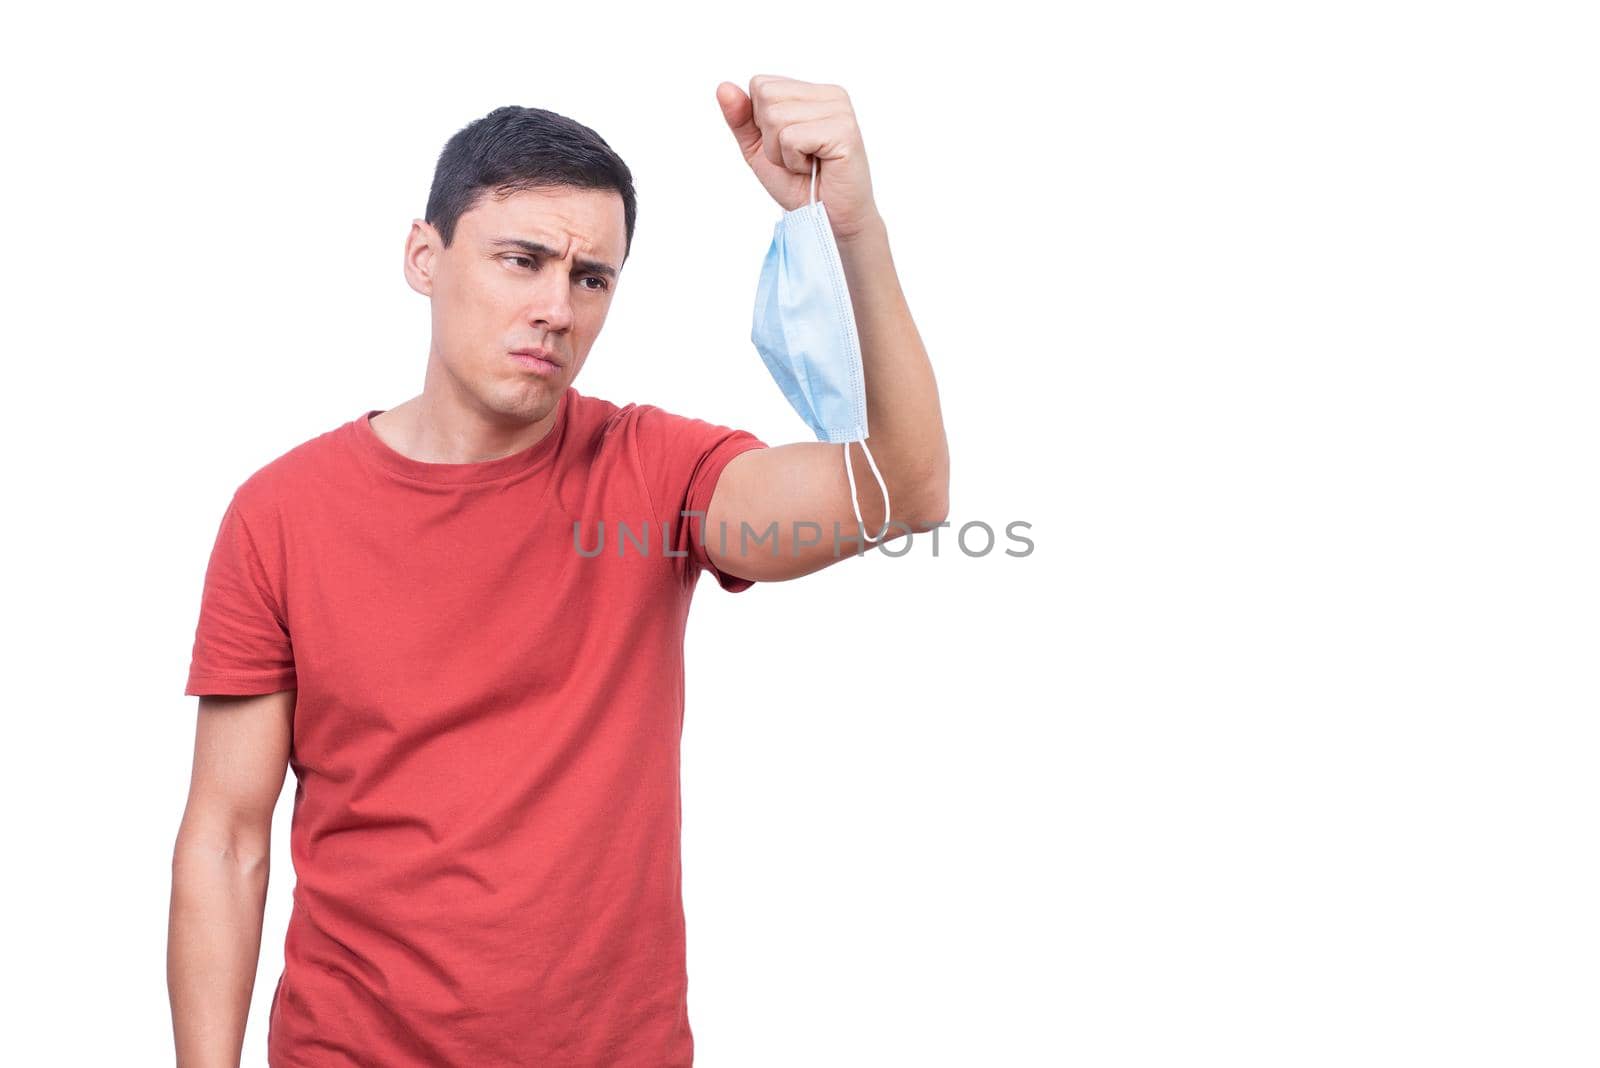 Sad male looking at protective mask in hand while standing isolated on white background during coronavirus pandemic in light studio